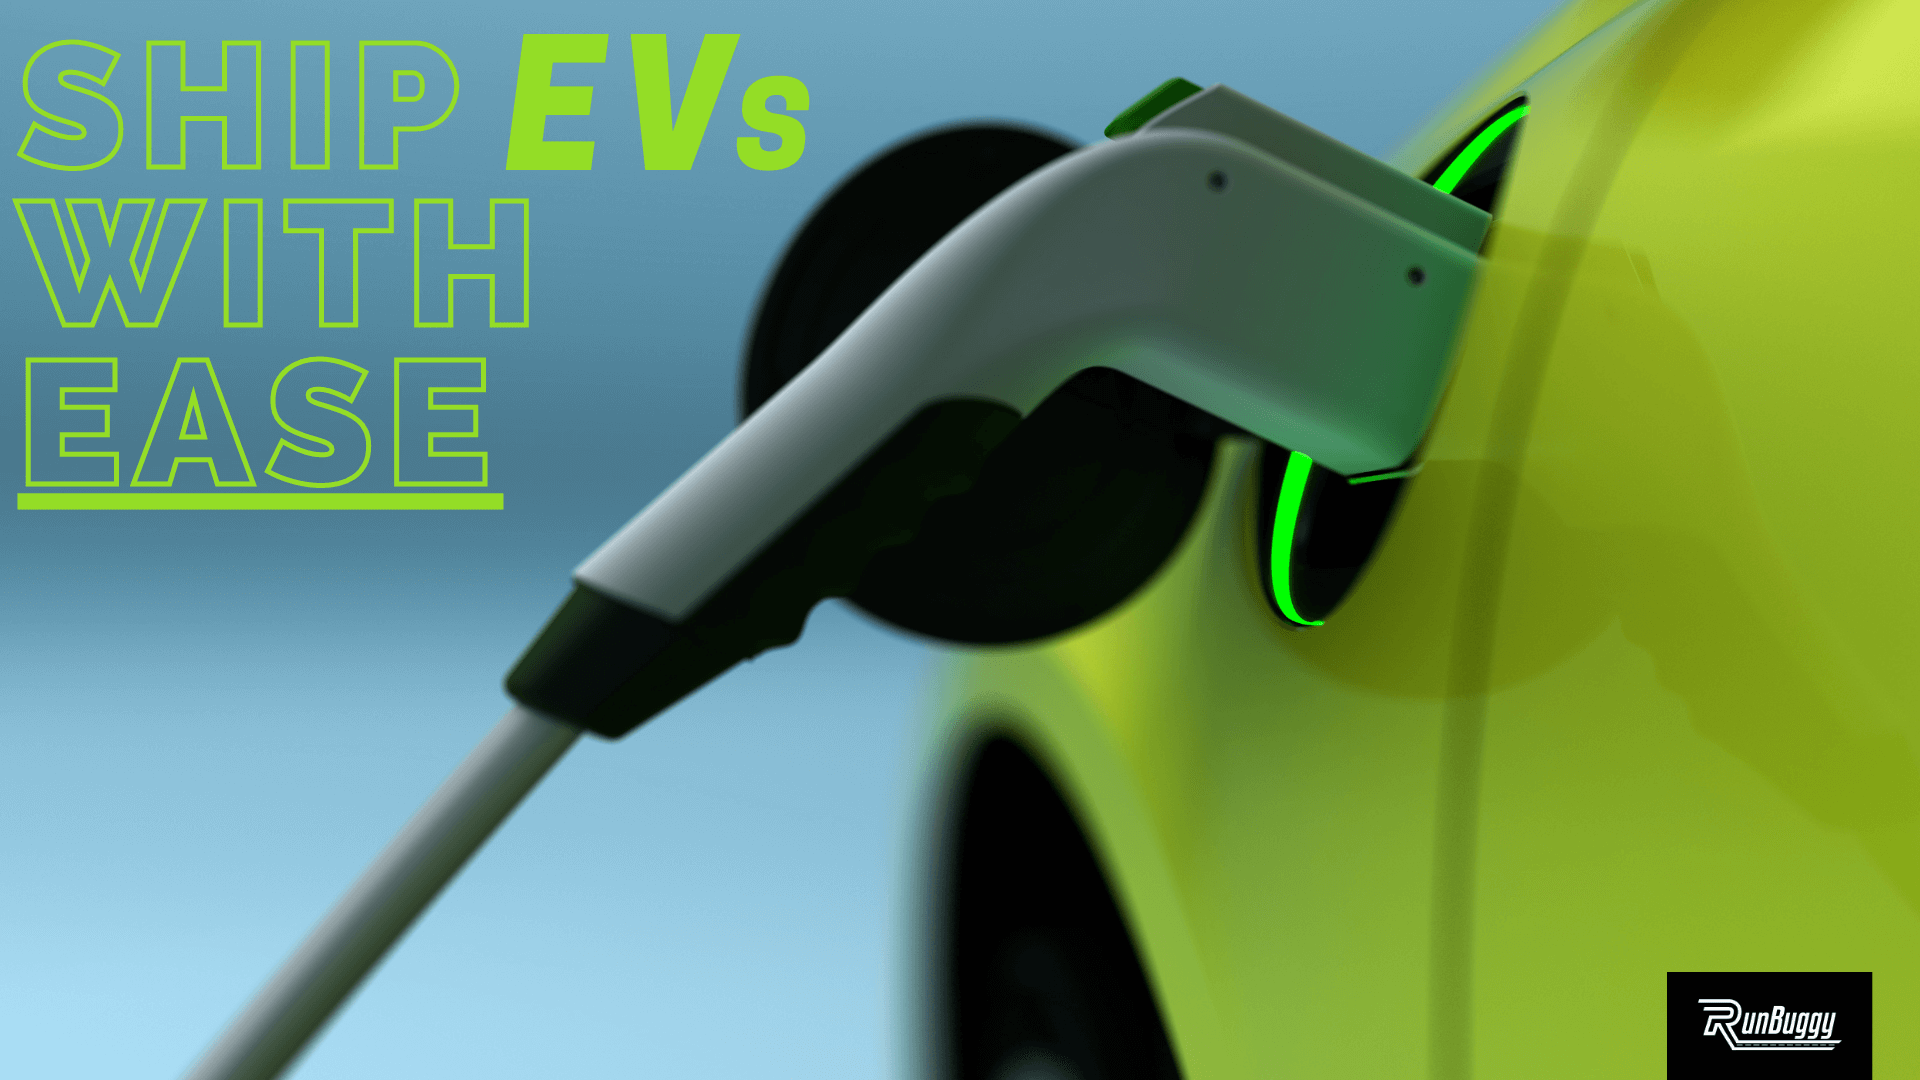 RunBuggy Lets You Ship EVs With Ease